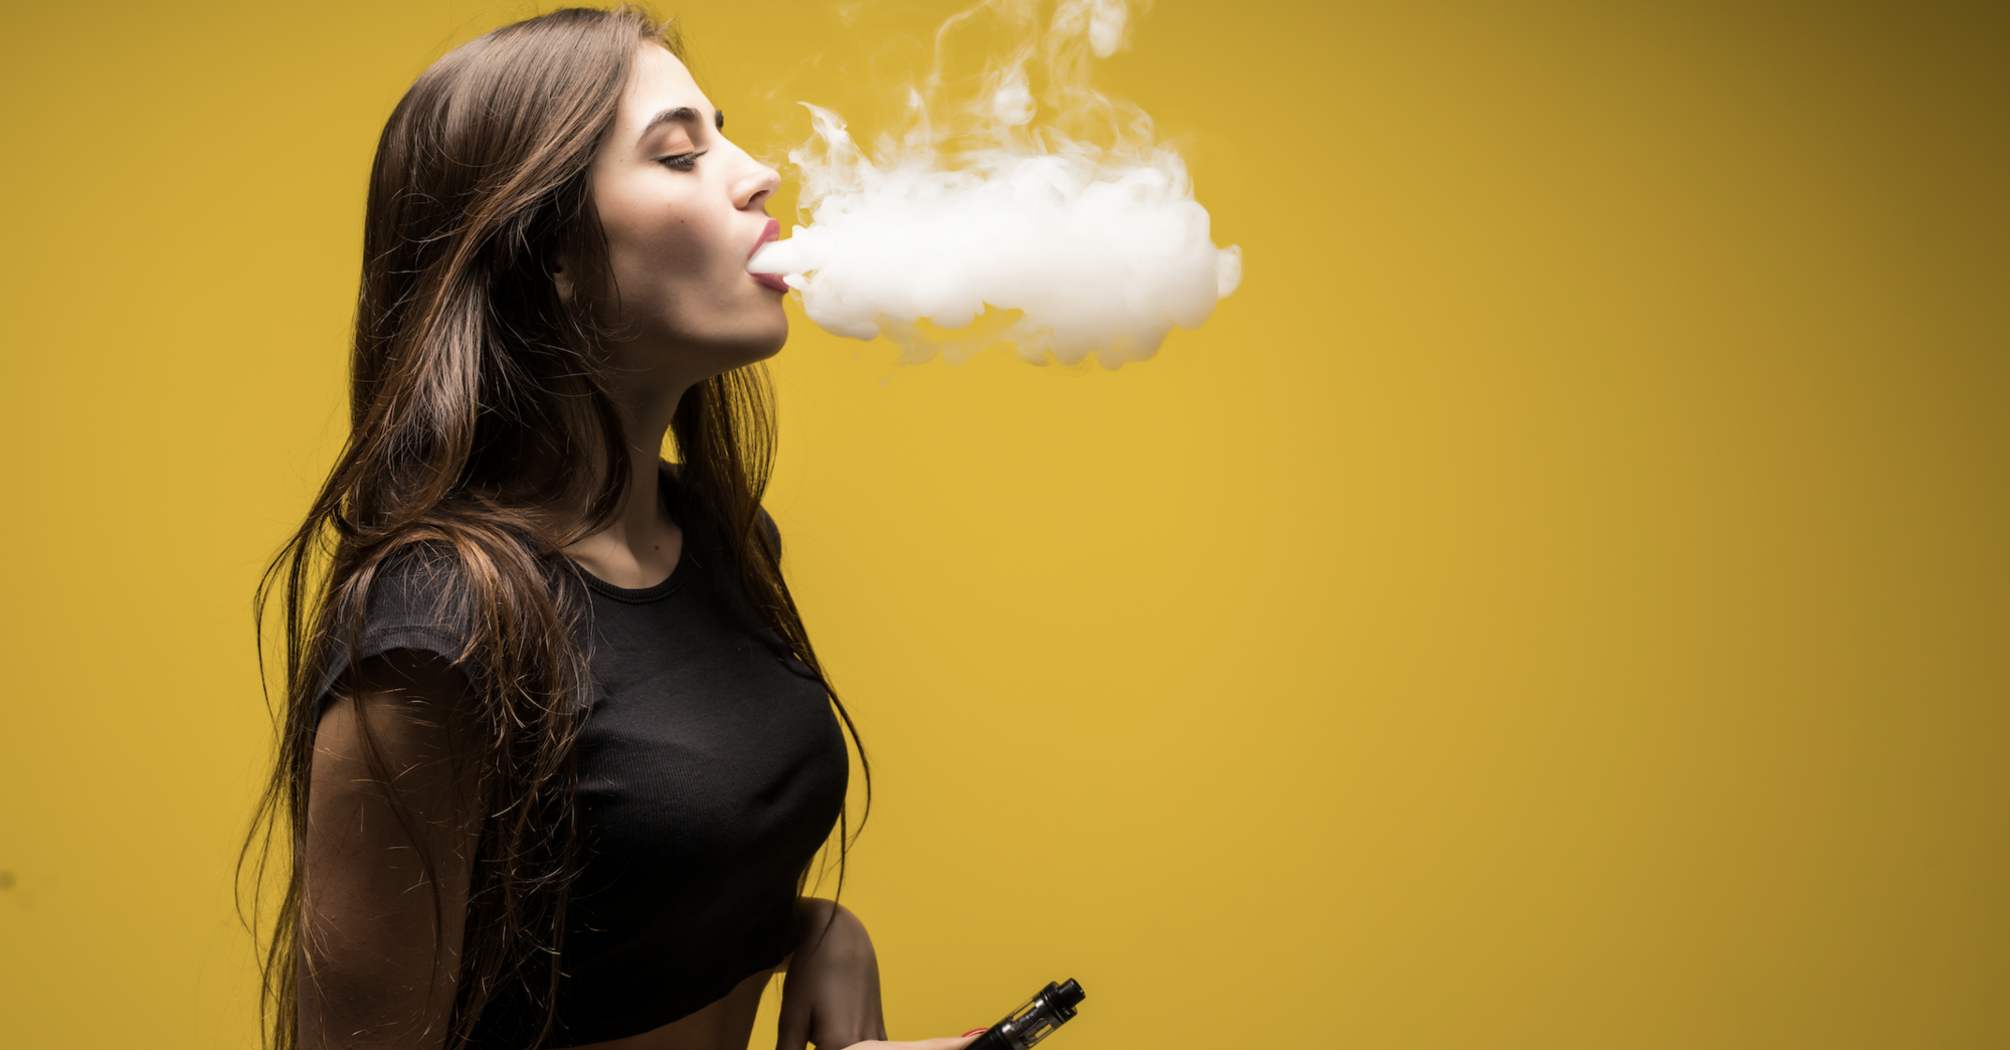 Vaping on an airplane: is it possible to vape, how to transport it and what you should know